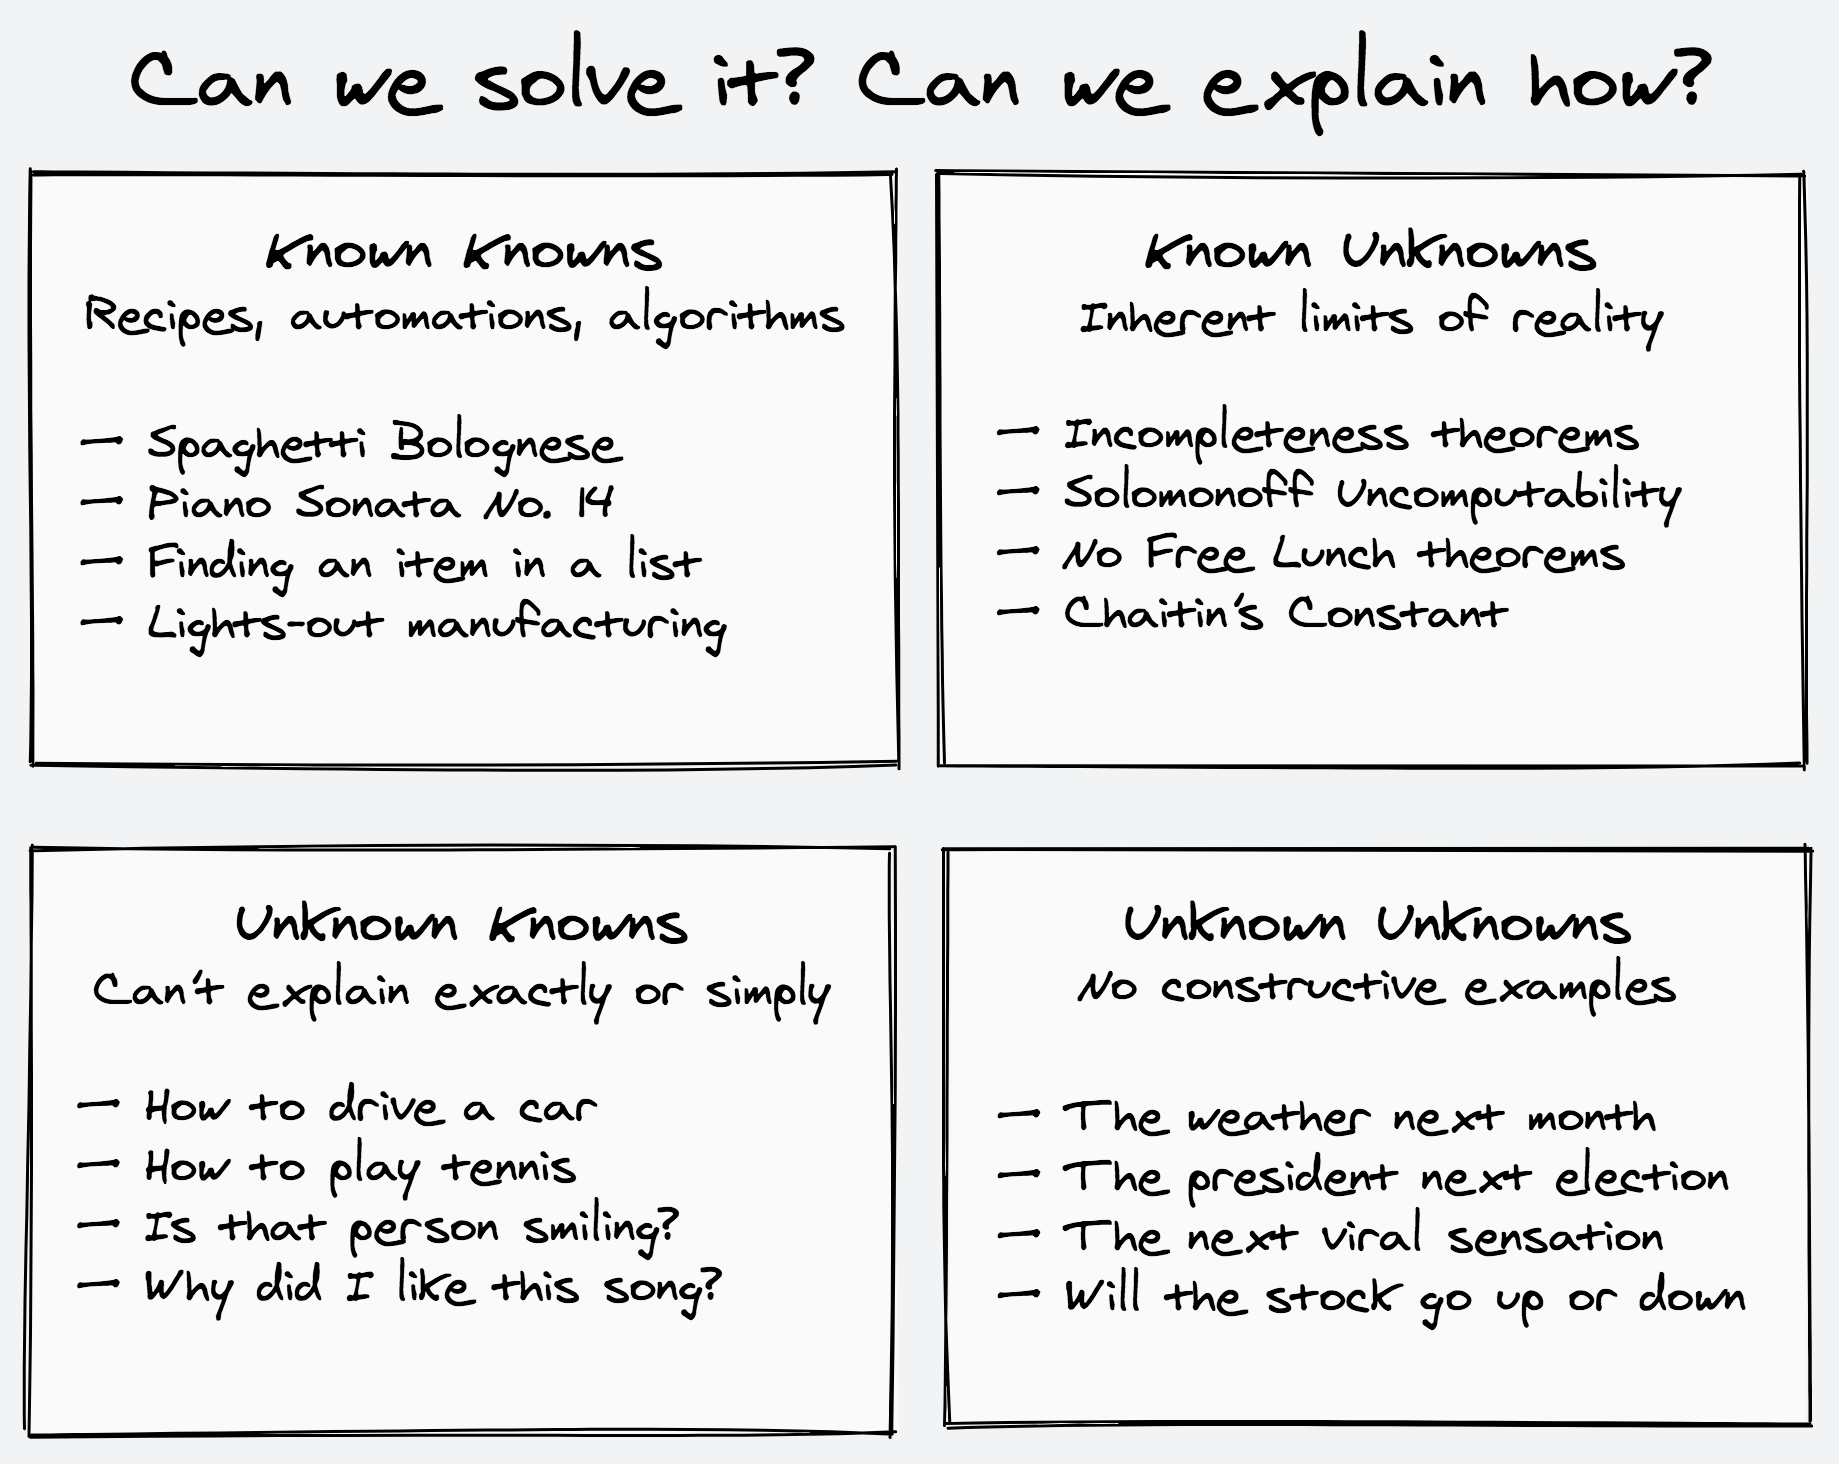 The four kinds of problems: the known knowns, the known unknowns, the unknown knowns, and the unknown unknowns